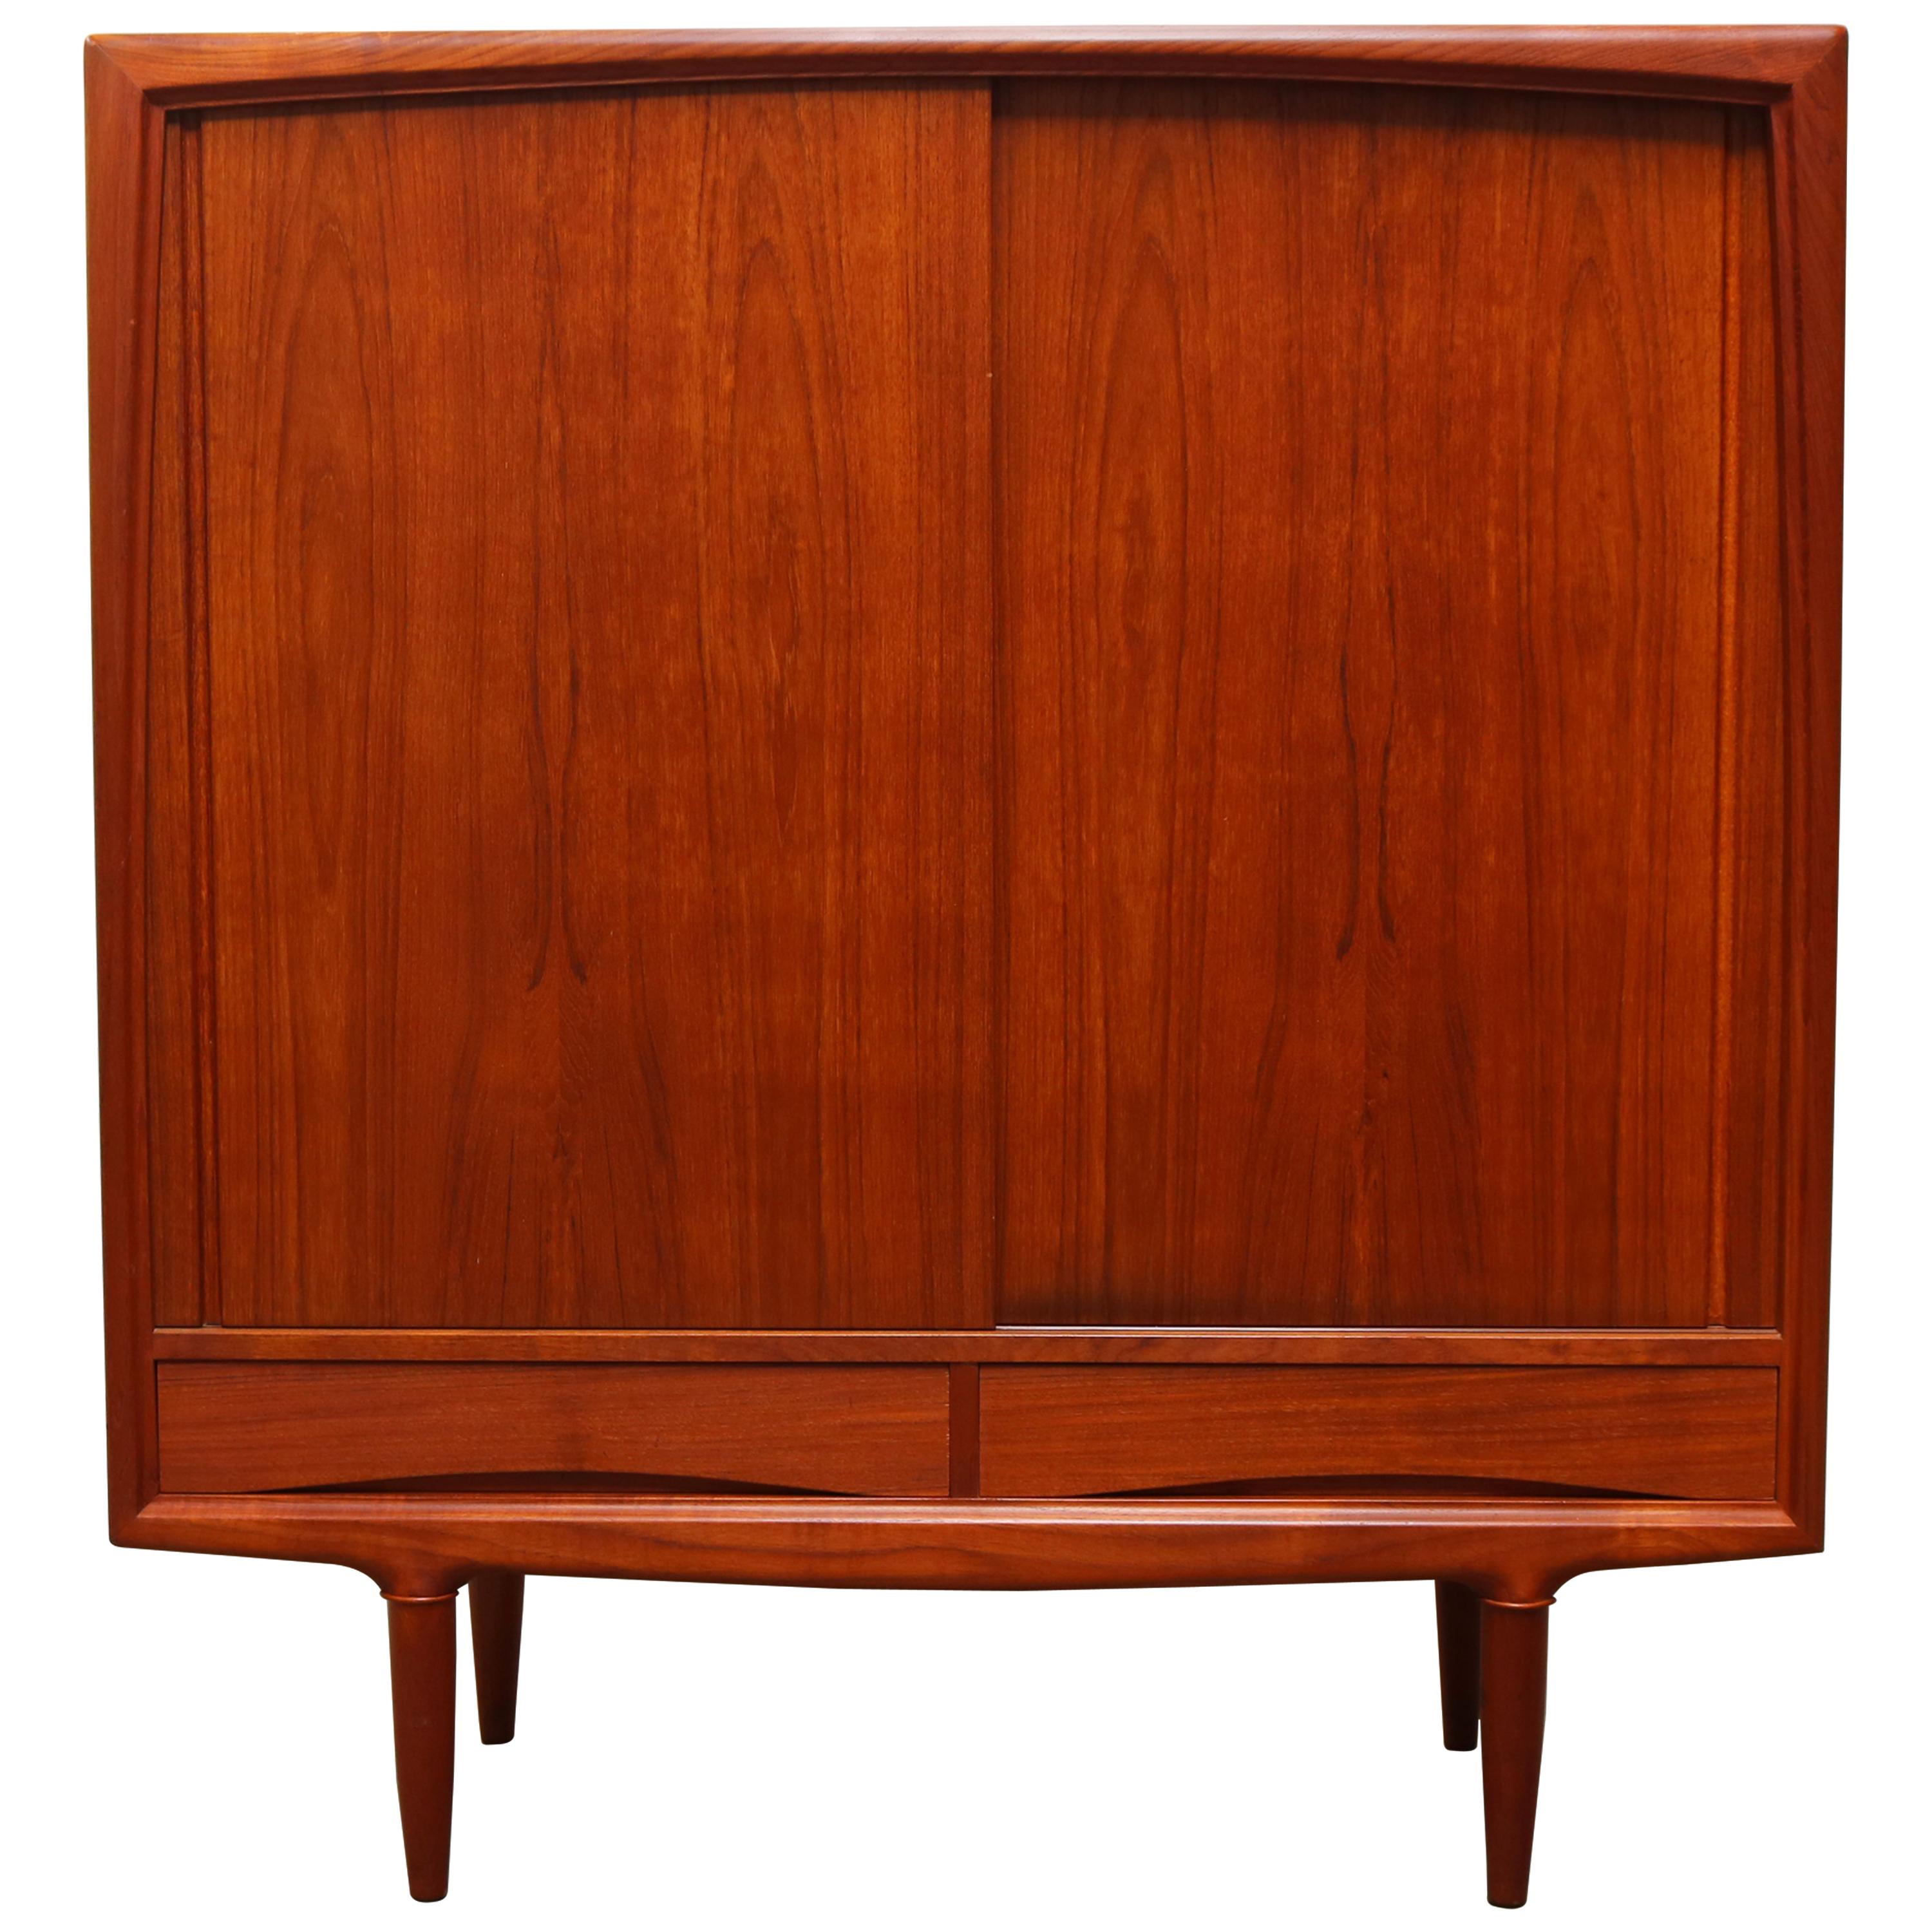 Magnificent Danish Highboard / Cabinet by Gunni Omann for Aco Mobler 1950s Teak 